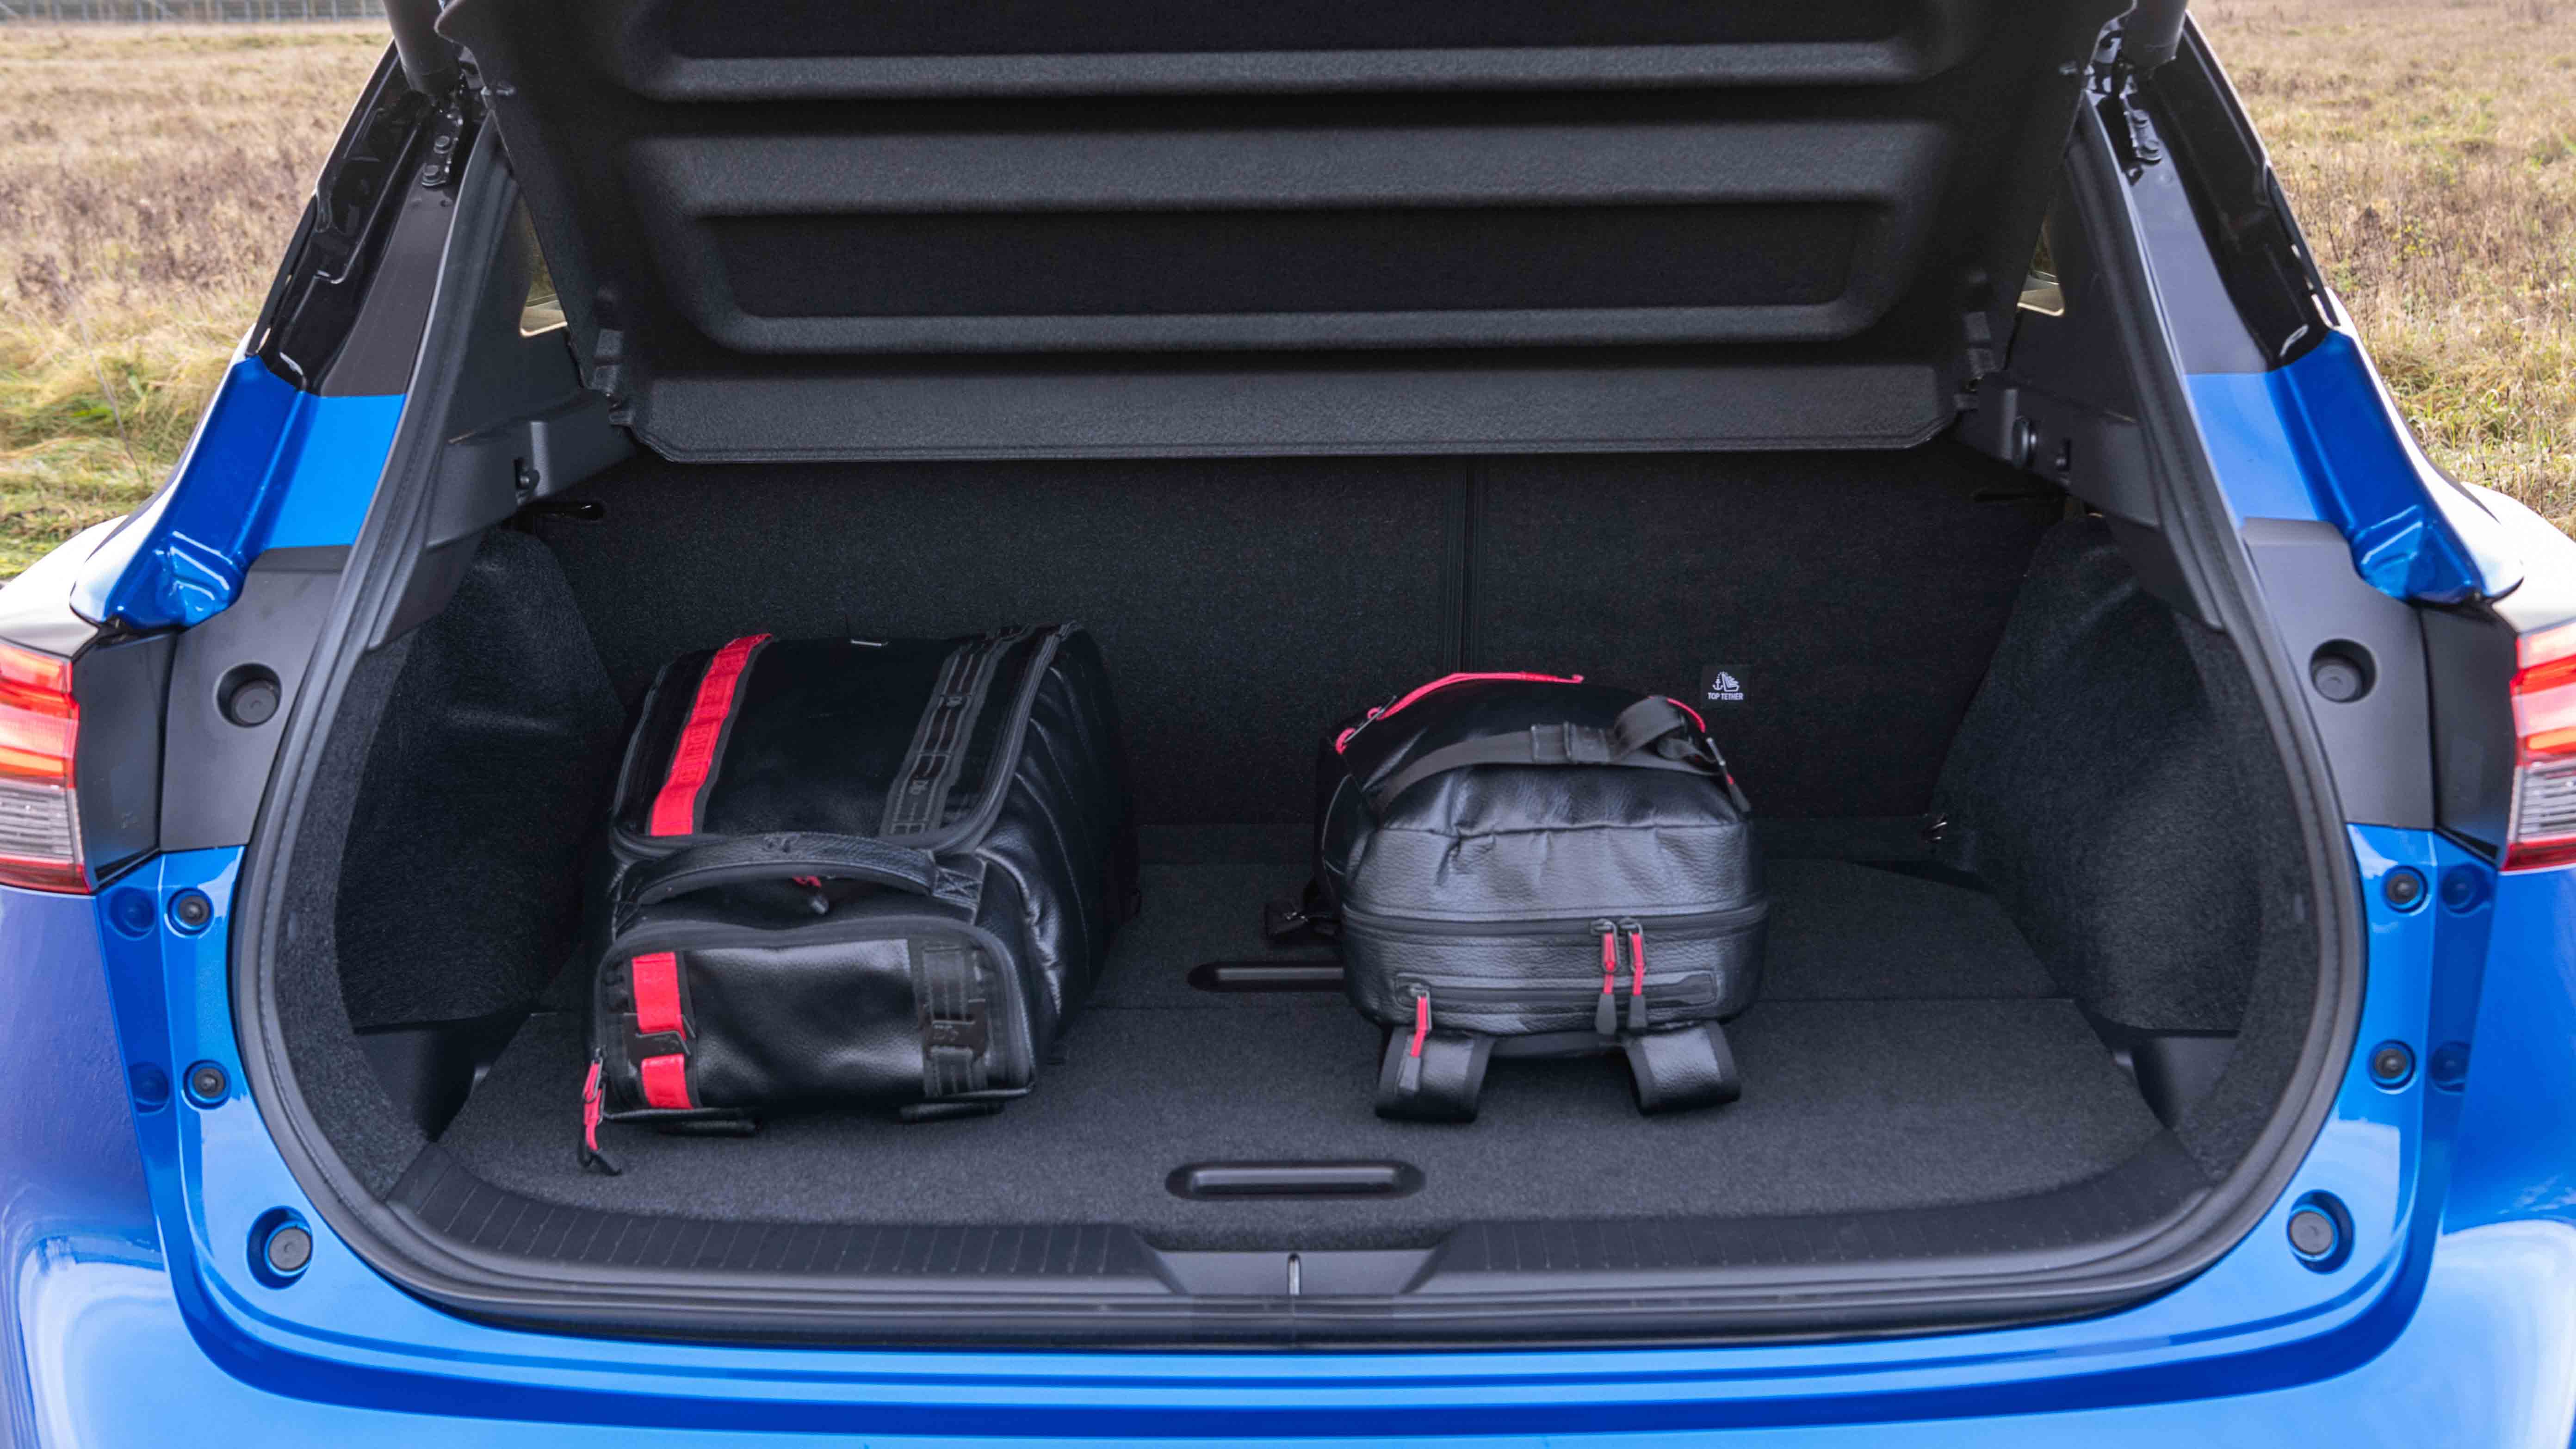 Nissan Qashqai boot with suitcases in